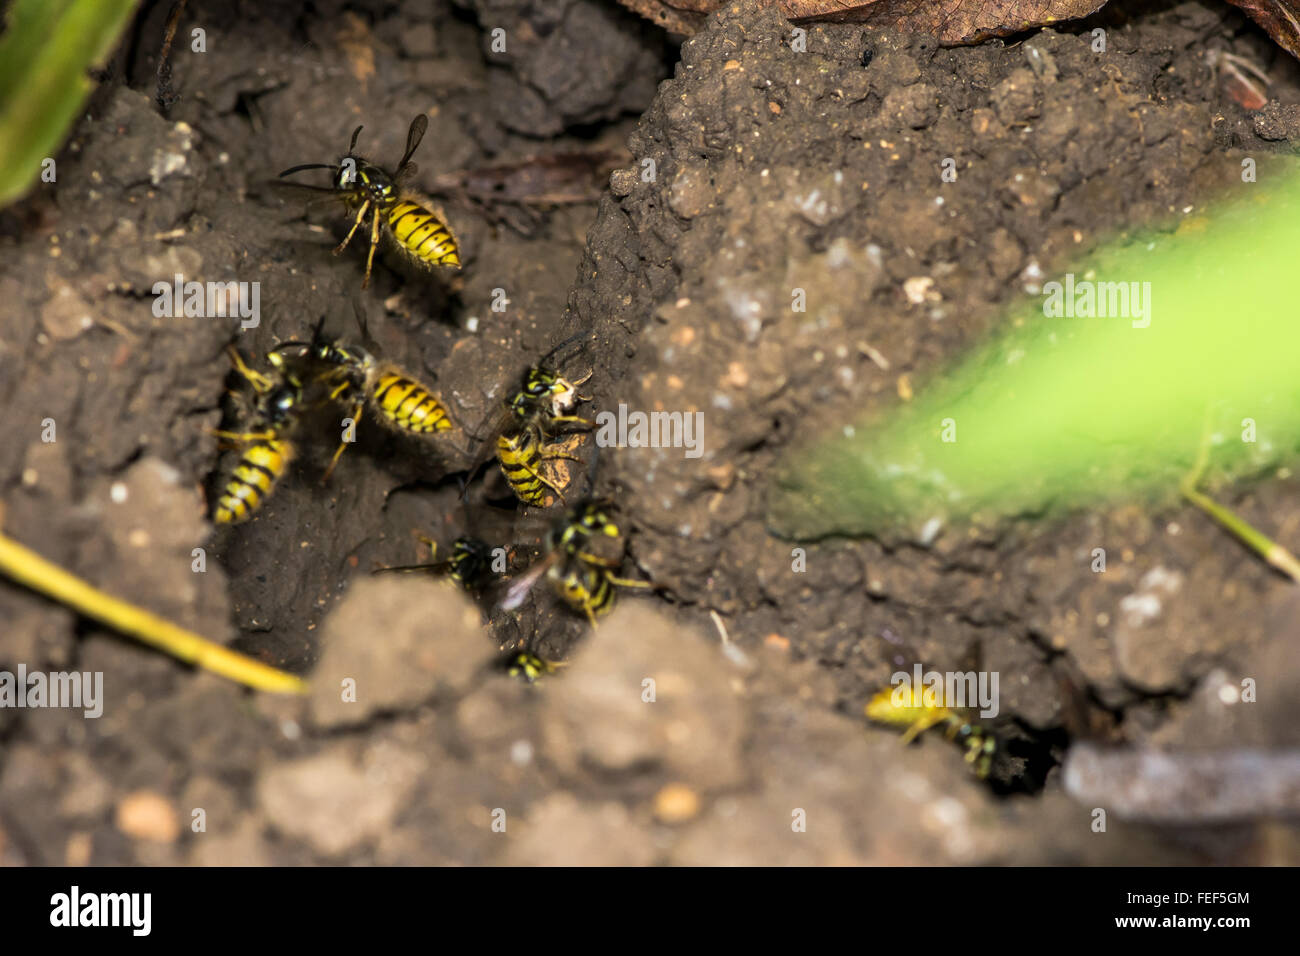 Entry to a common wasp nest (Vespula vulgaris). Social insects around the entrance of an underground nest, composite image Stock Photo